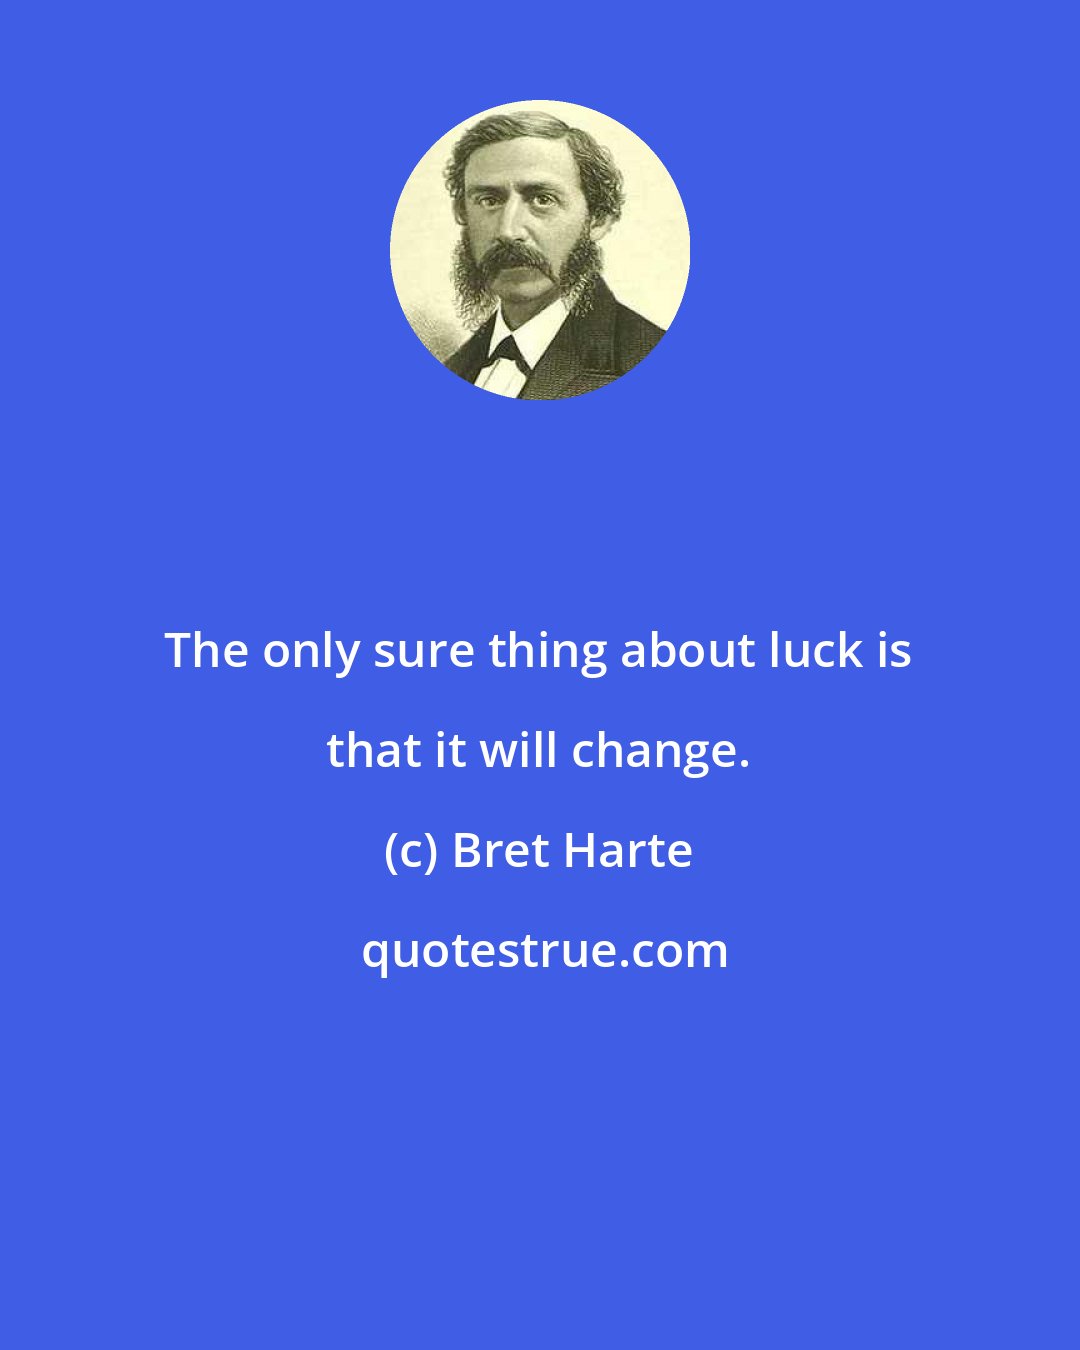 Bret Harte: The only sure thing about luck is that it will change.